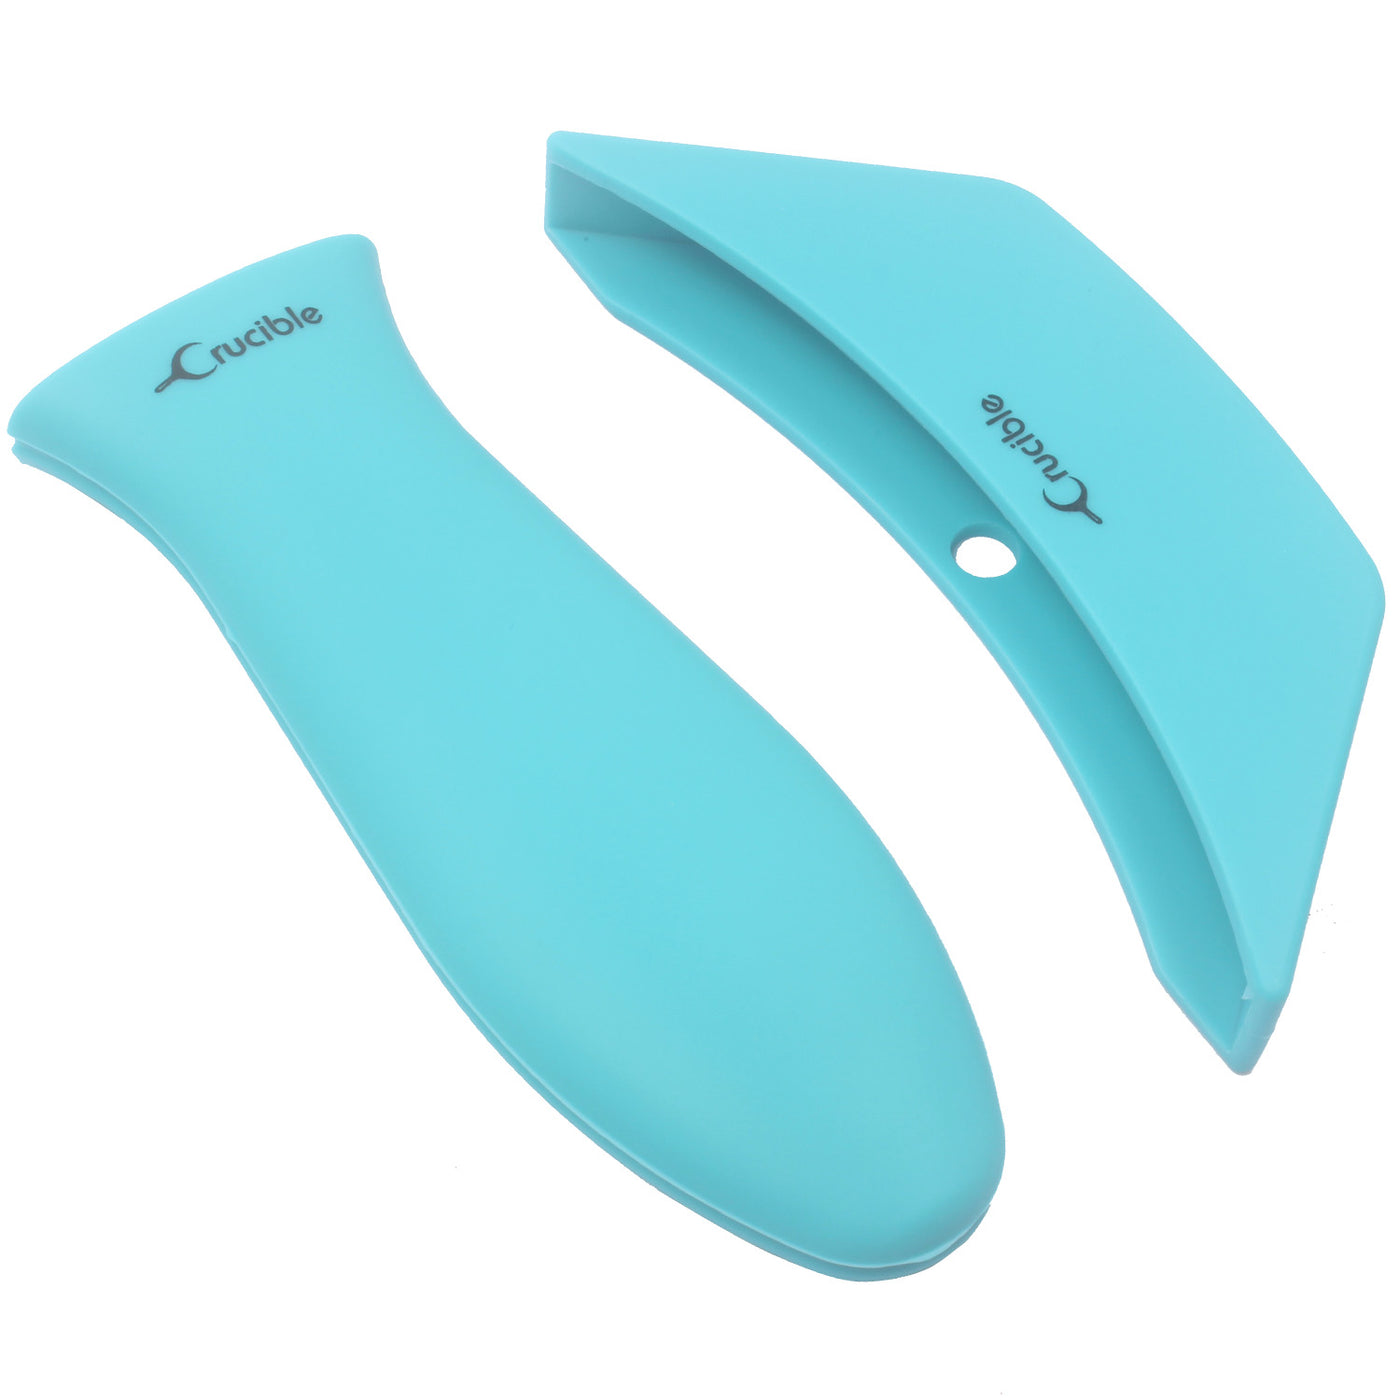 Silicone Potholders (2-Pack Combo Turquoise) - Handle Covers for Cast Iron Skillets